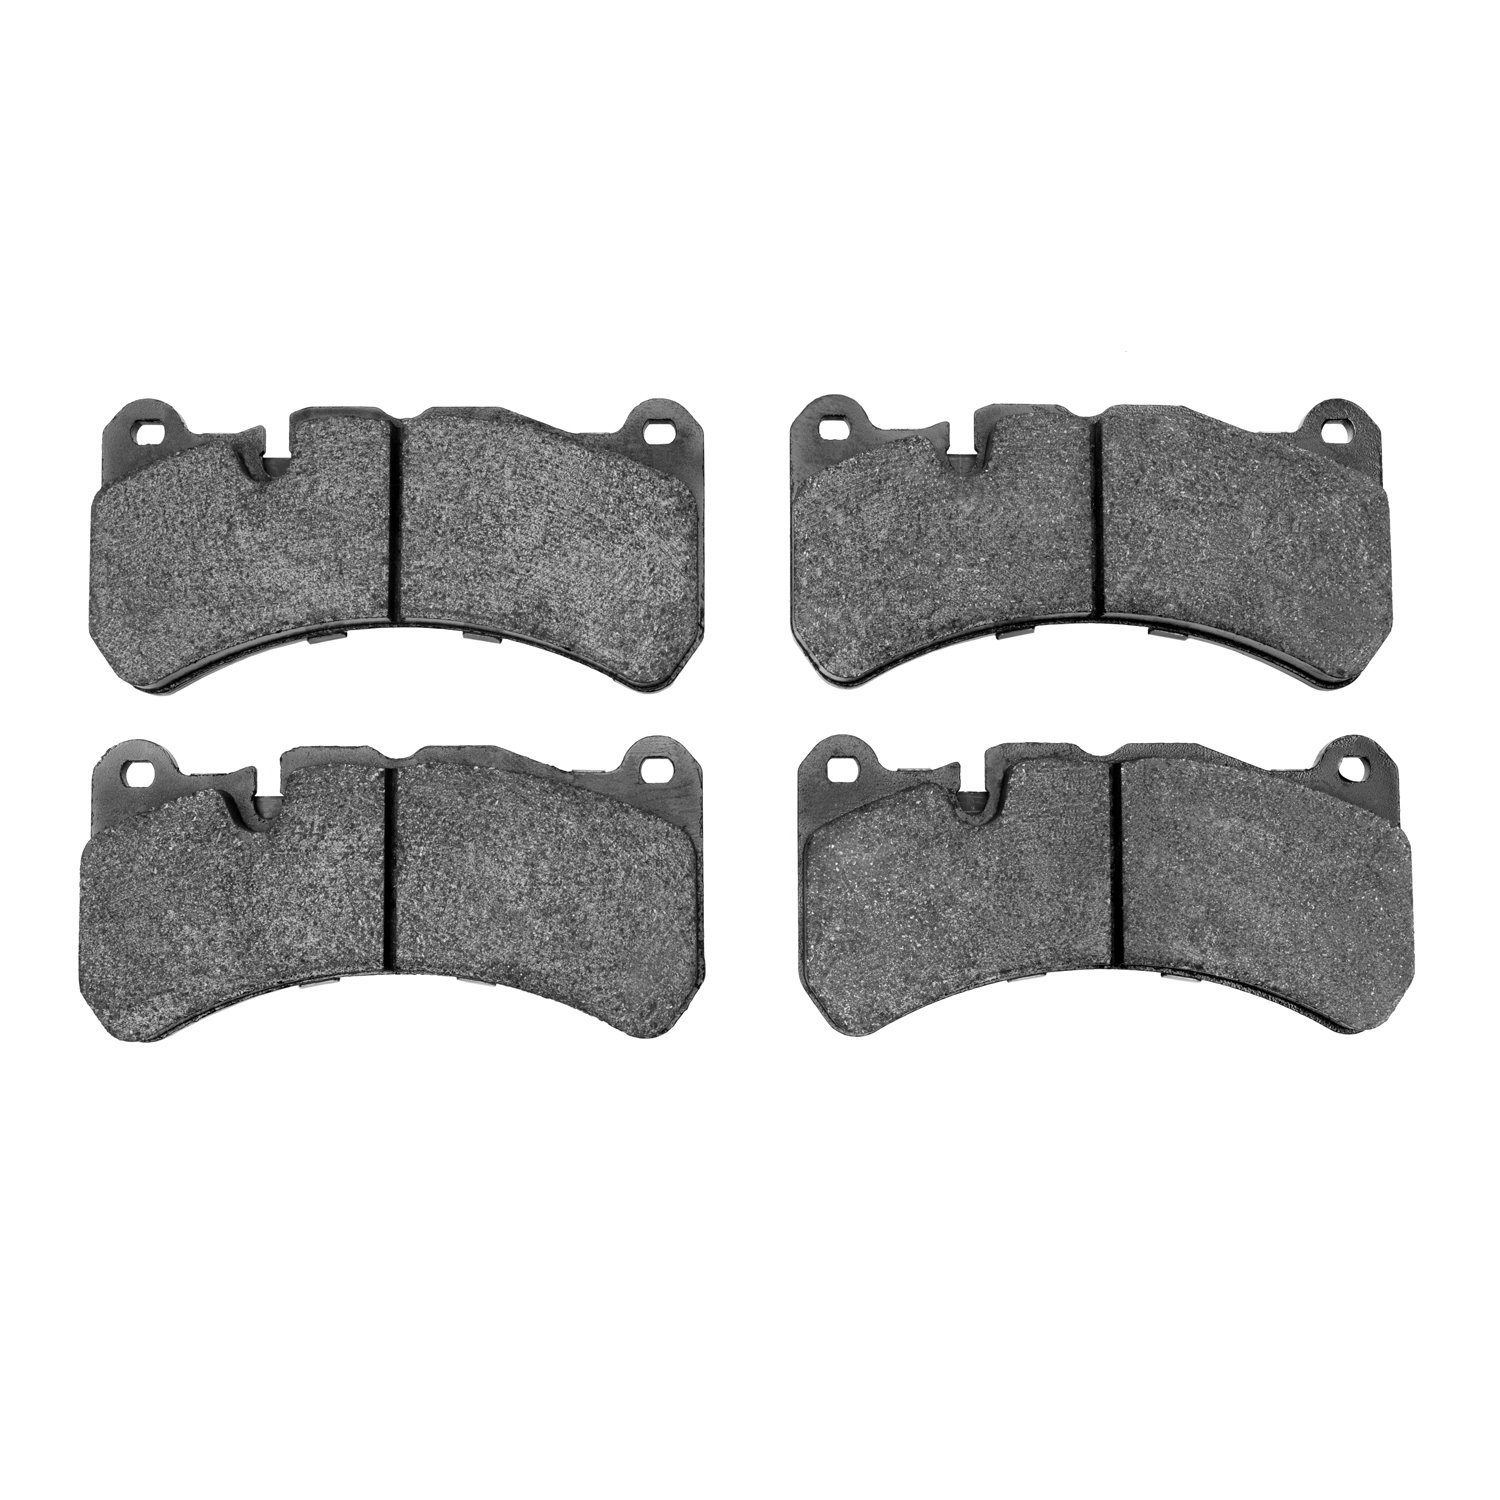 1551-1116-00 5000 Advanced Low-Metallic Brake Pads, 2005-2019 Multiple Makes/Models, Position: Front